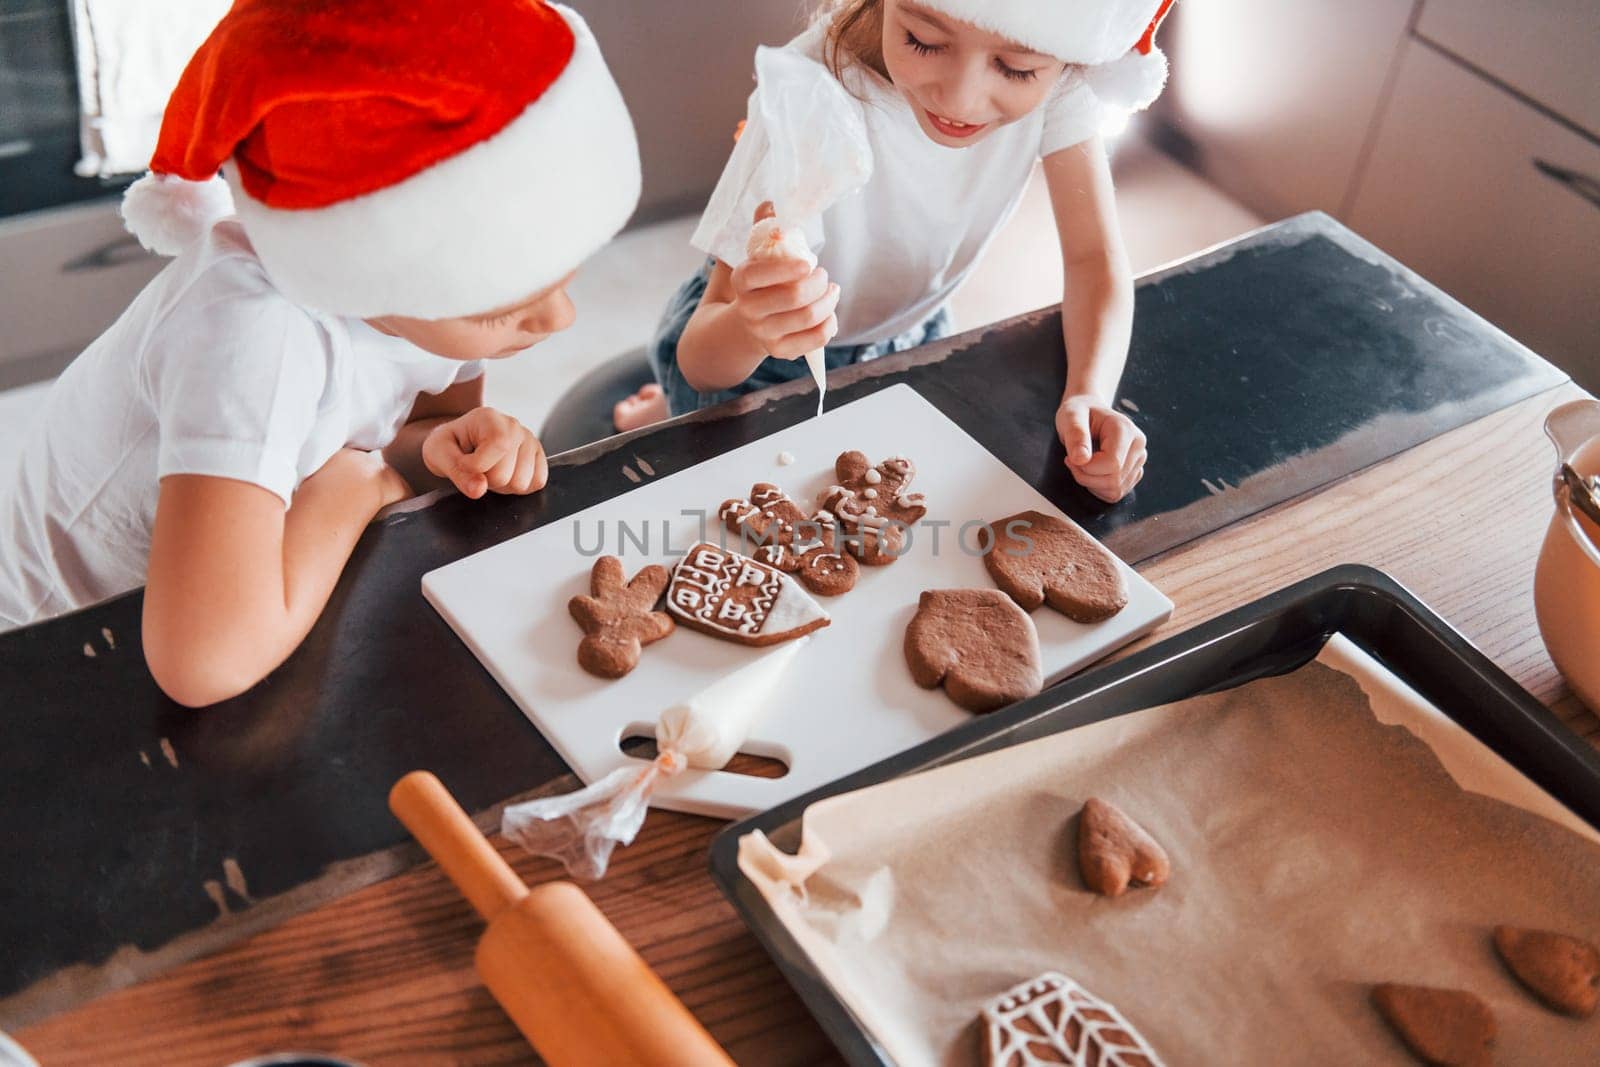 In santa hats. Little boy and girl preparing Christmas cookies on the kitchen.